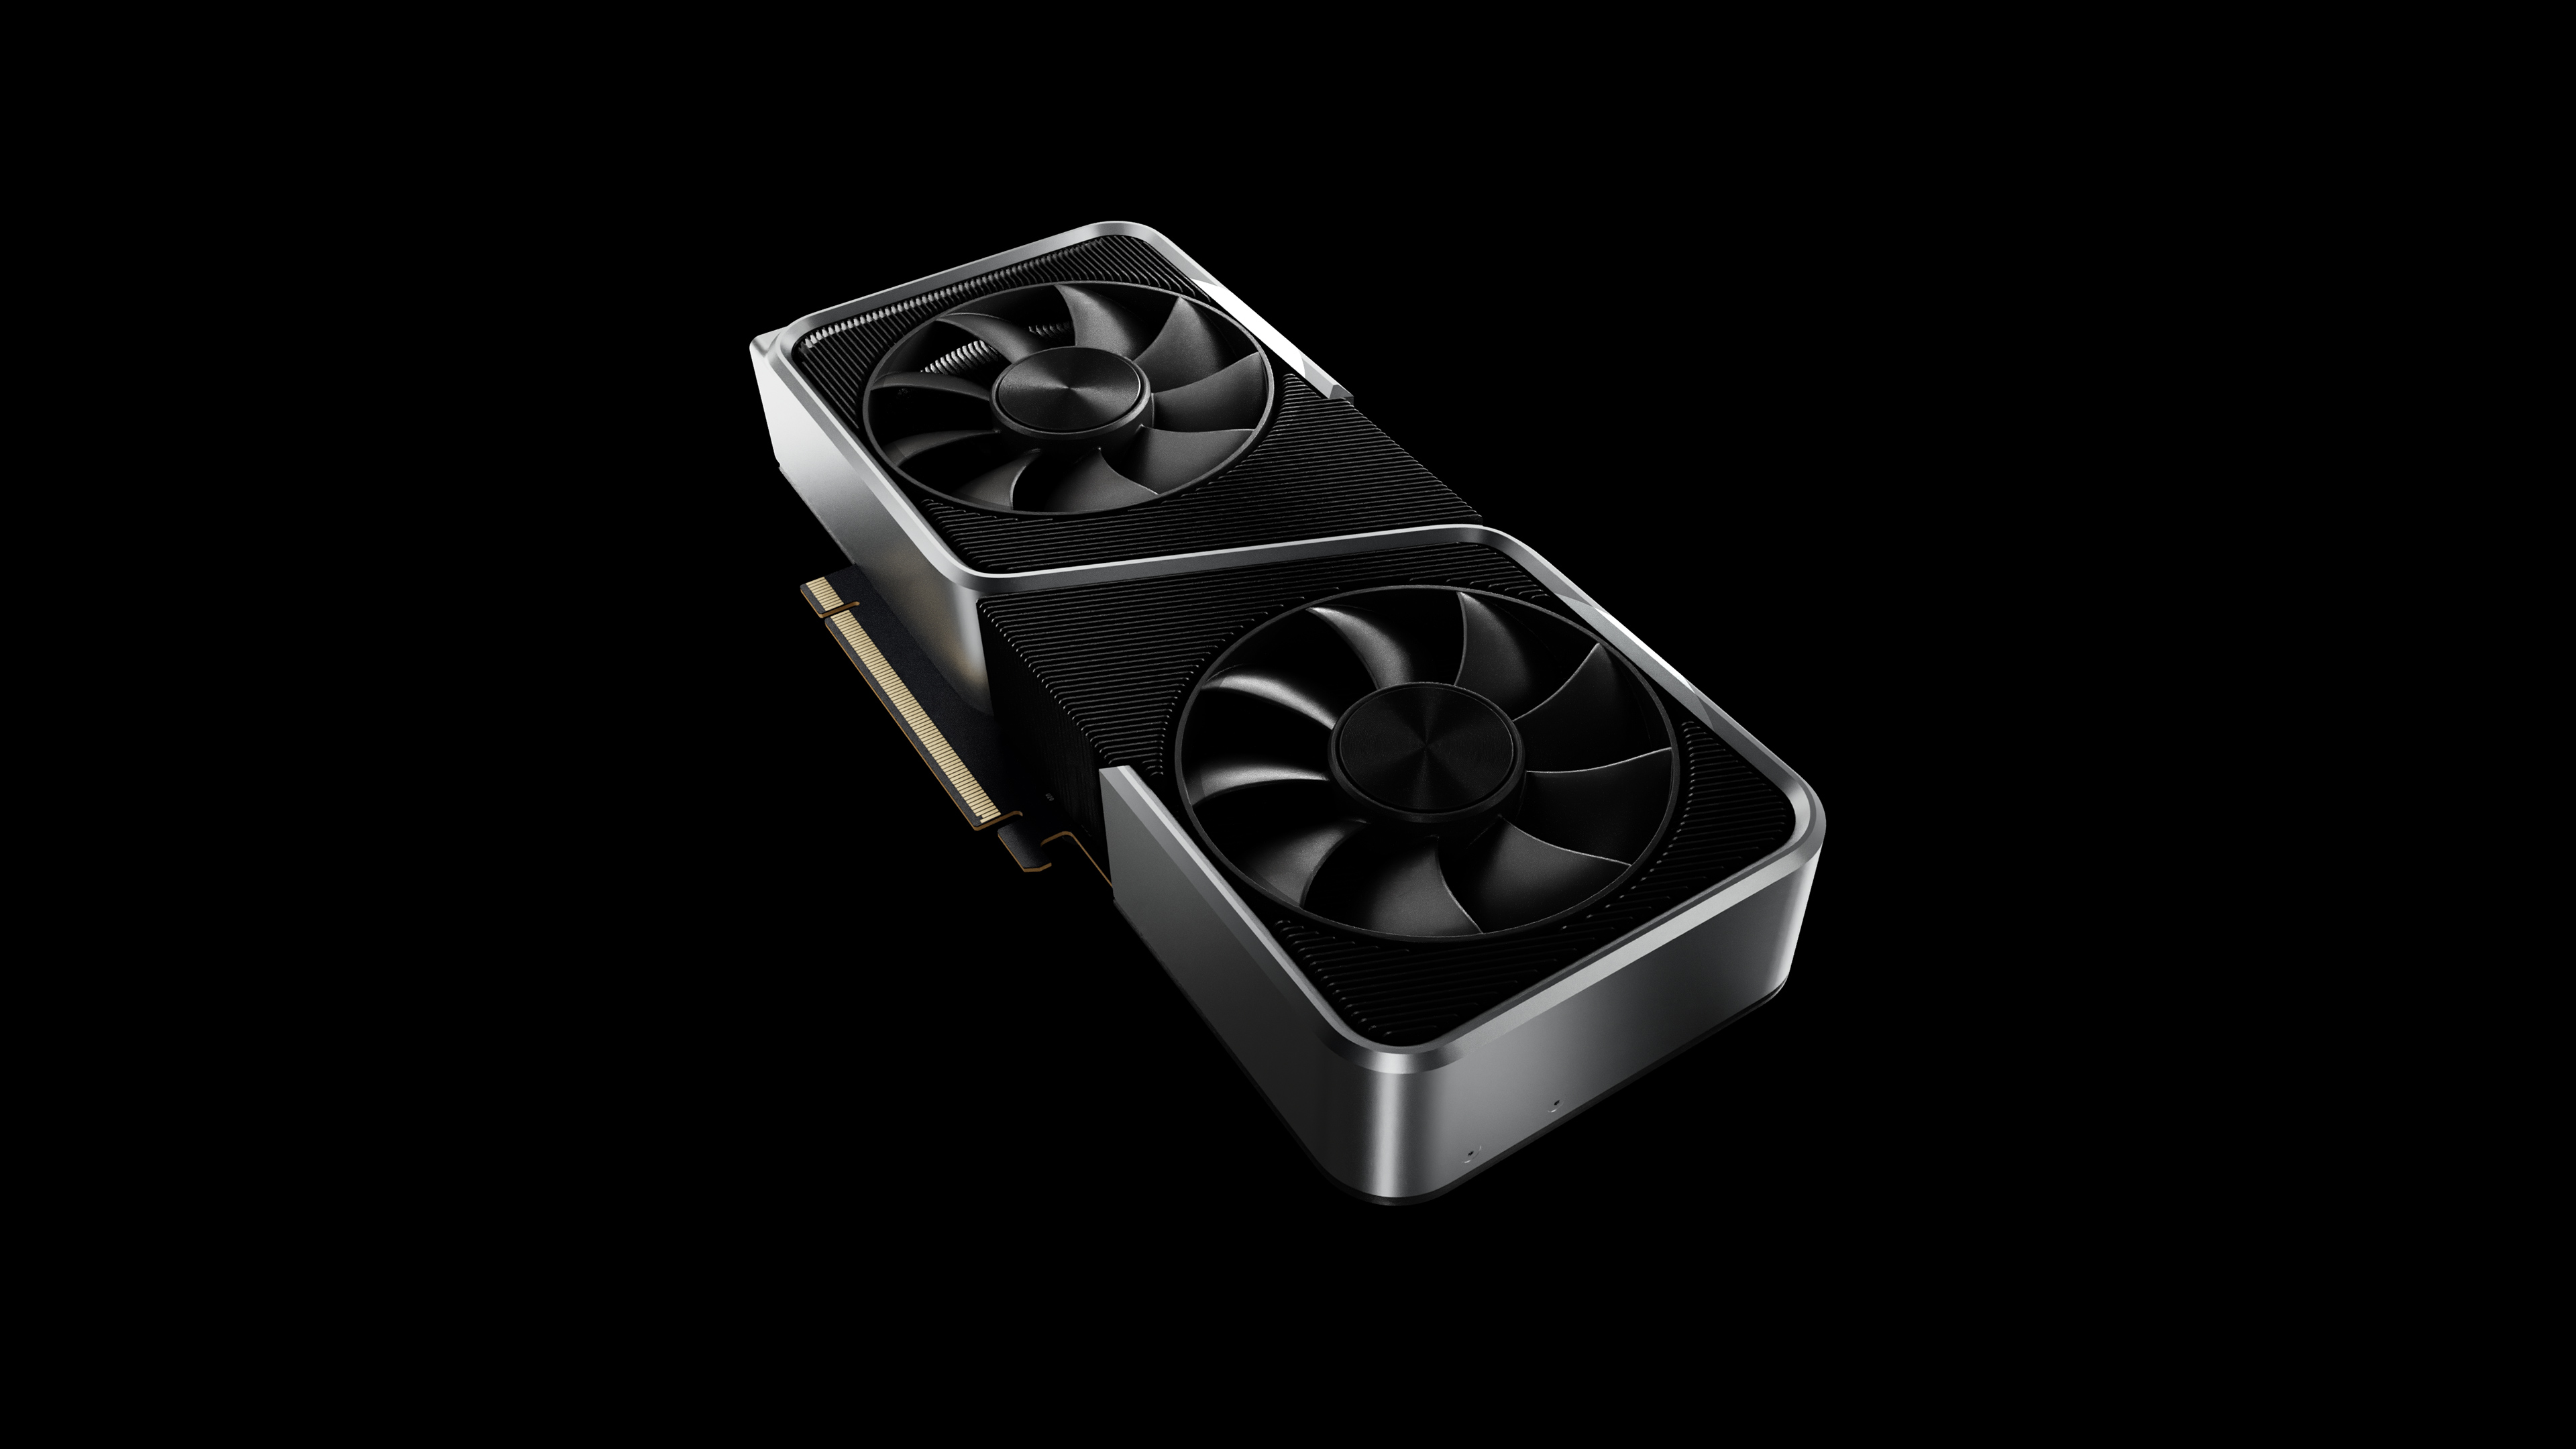 Gamers got their hands on the GeForce RTX 3060 two years after launch.  The video card showed an explosive growth in popularity in Steam statistics